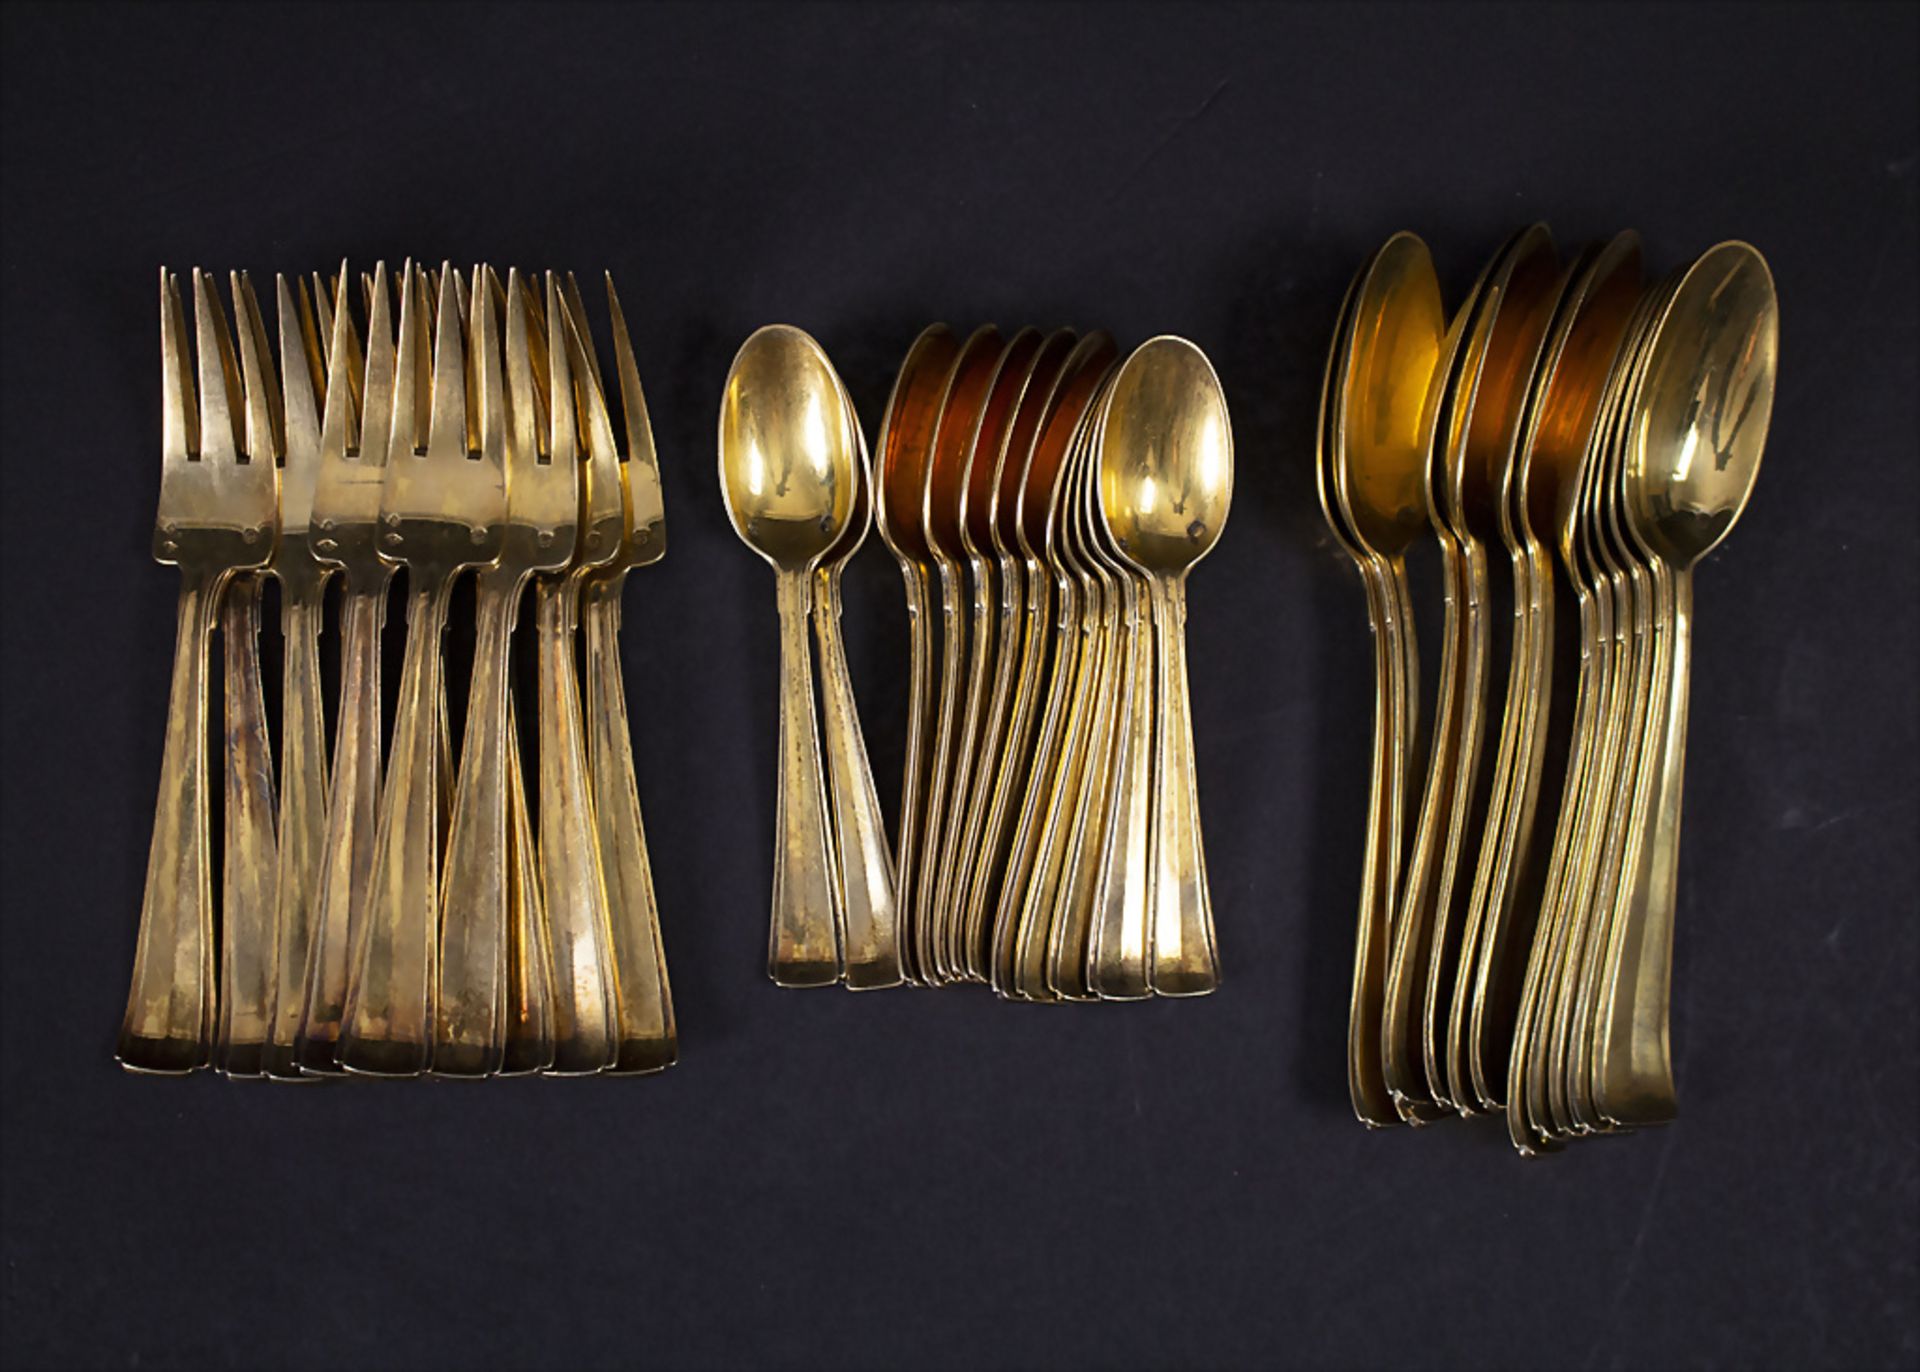 34 tlg. Silber-Besteck / 34 pieces of silver cutlery, Orfèvre Christofle, Paris, 20. Jh.